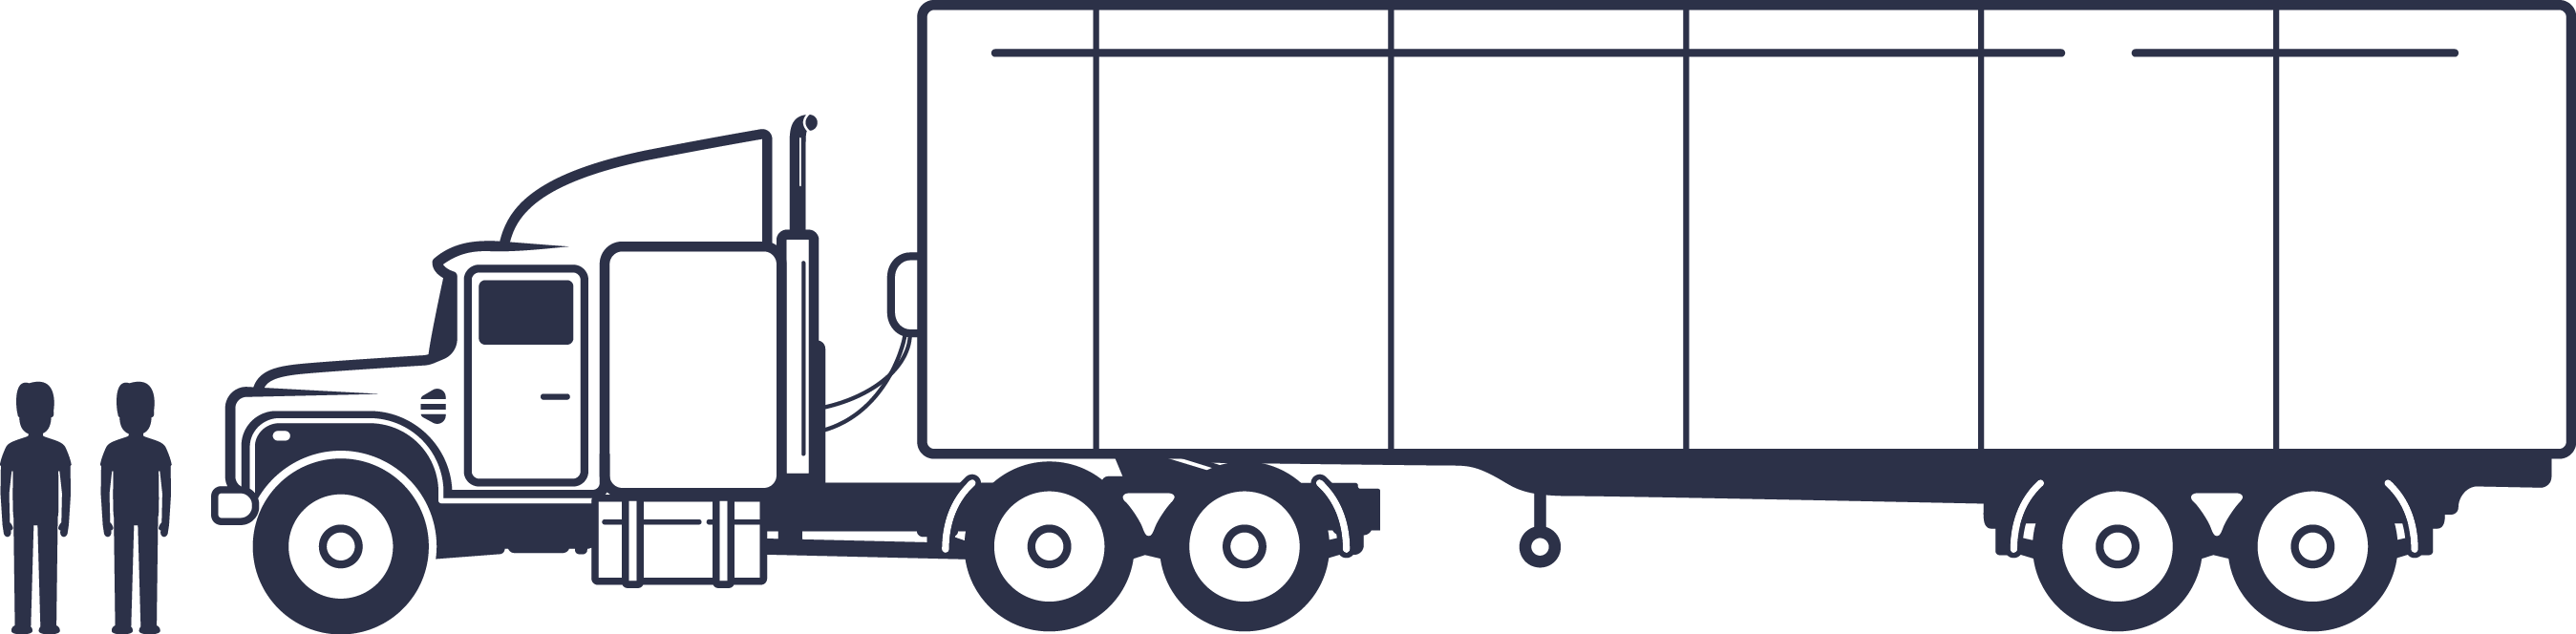 driving clipart lorry driver